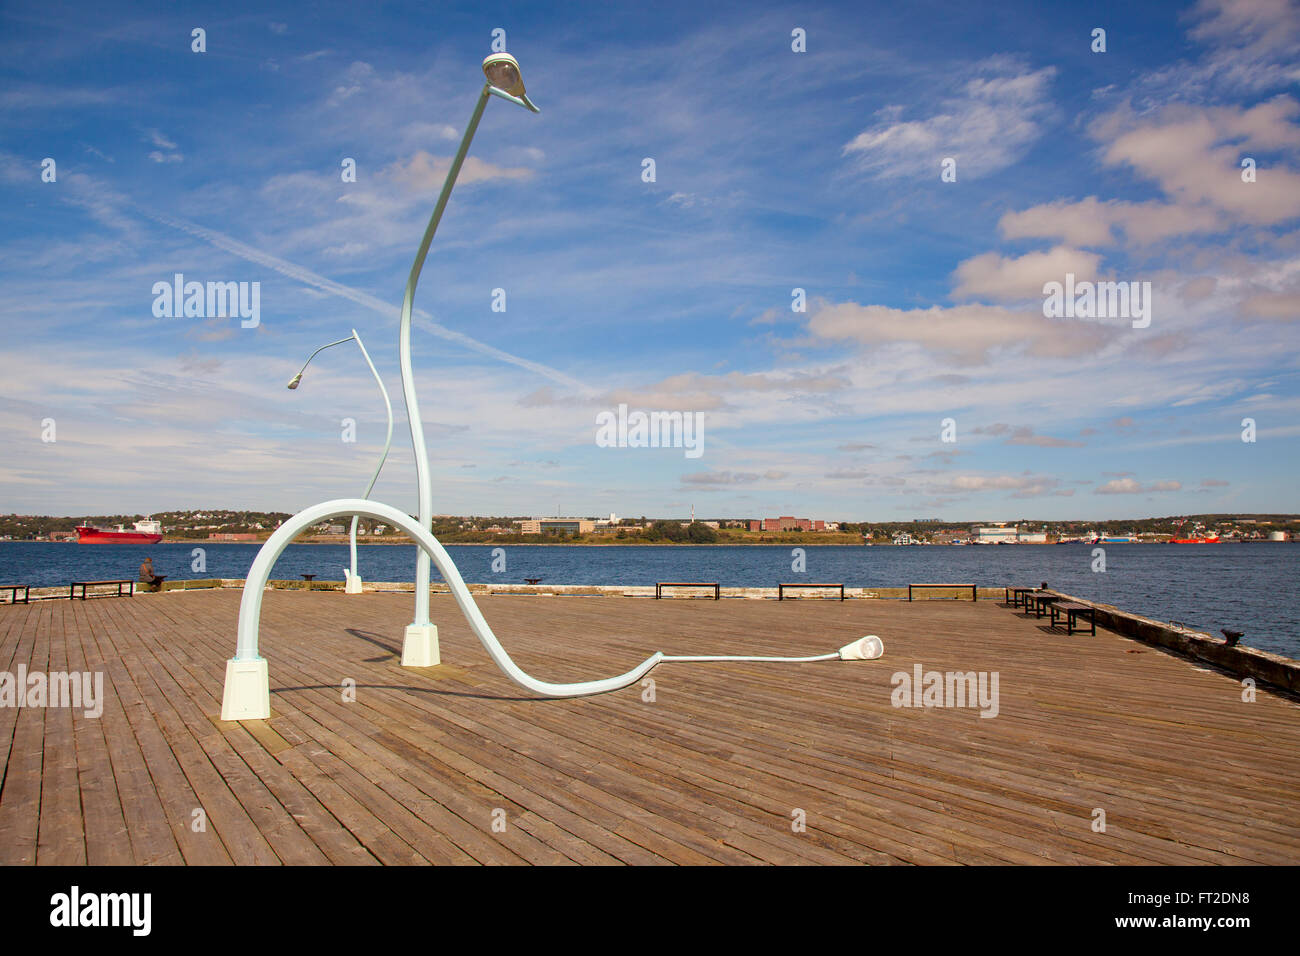 HALIFAX - SEPTEMBER 10:  Artwork 'Got Drunk Fell Down' featuring three disorderly, personified streetlamps on South Battery Pier Stock Photo